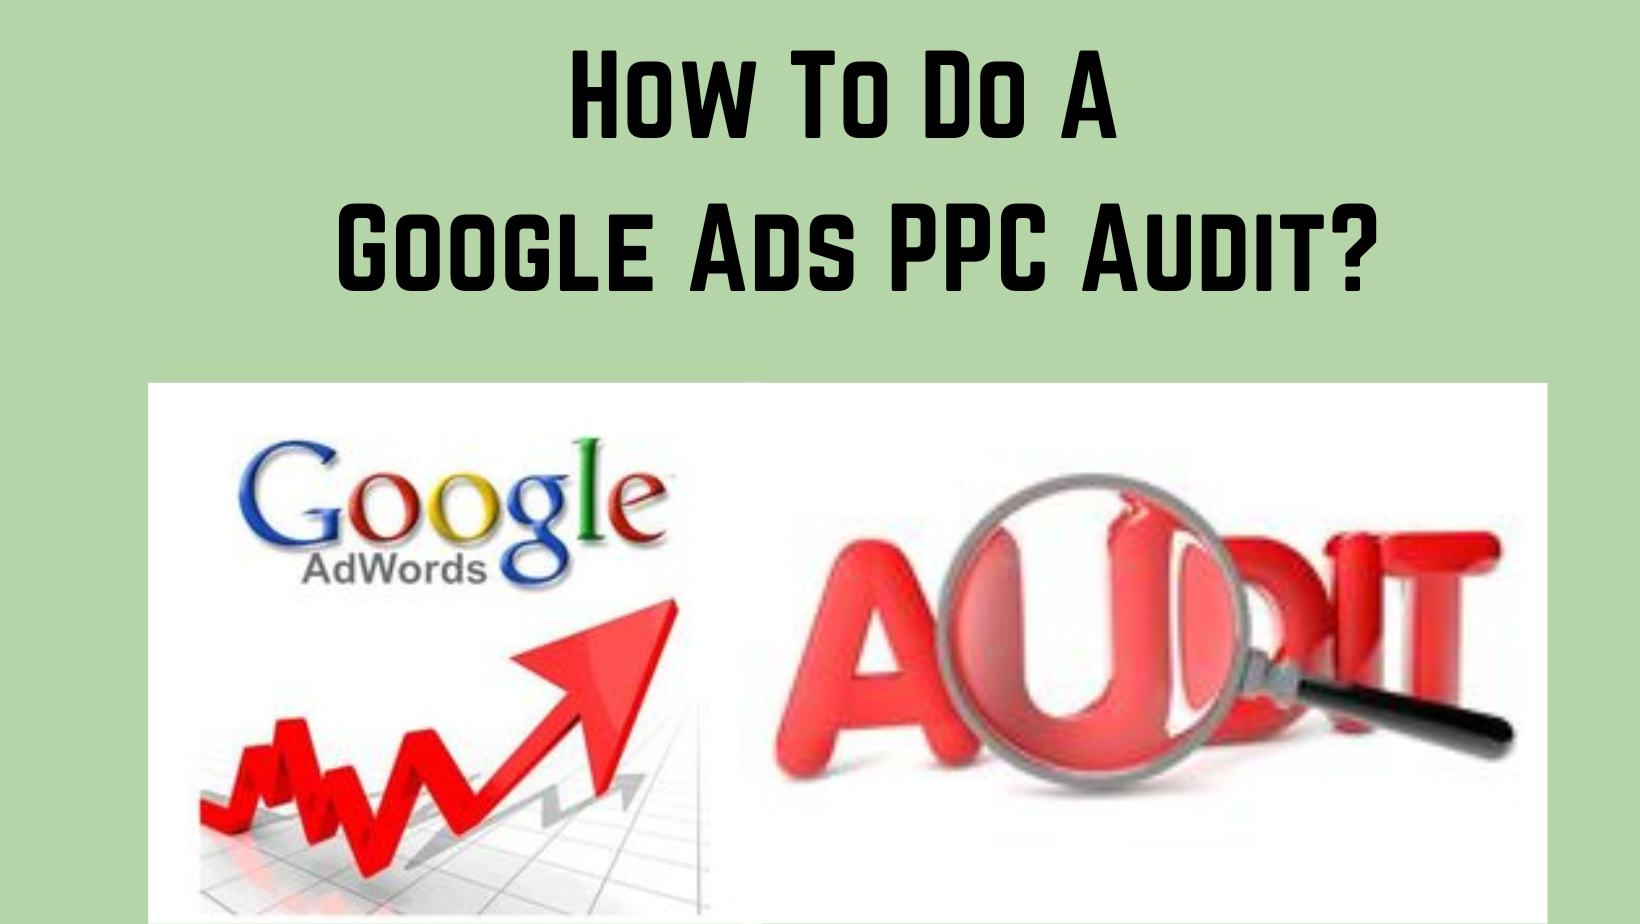 How To Do A Google Ads PPC Audit